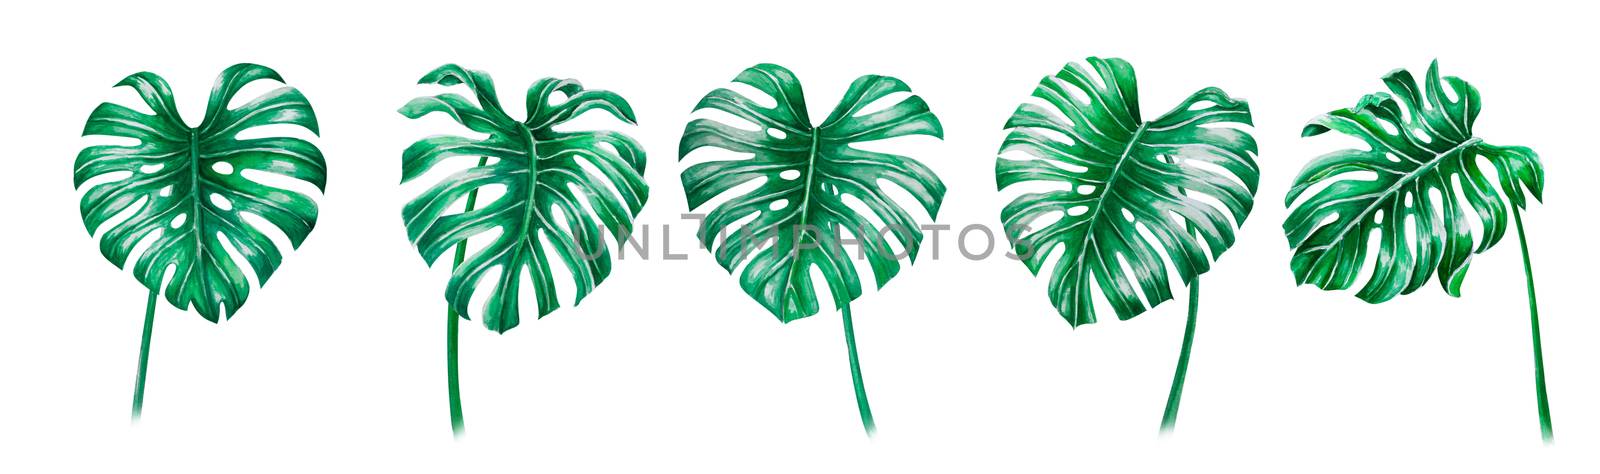 Green monstera tropical leaves watercolor illustration, isolated by pt.pongsak@gmail.com